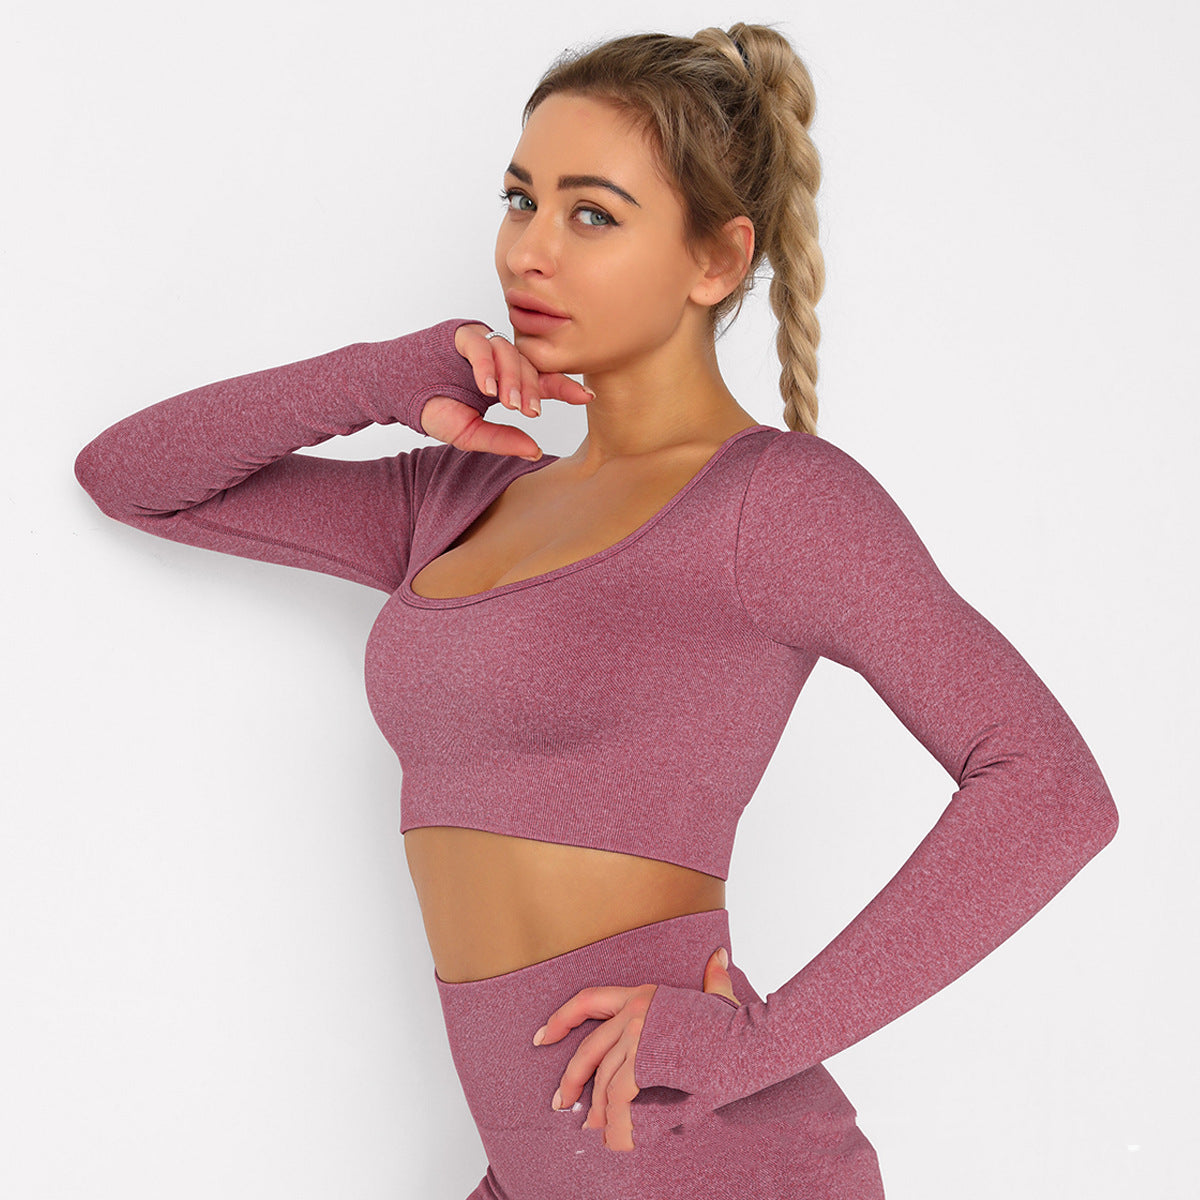 Blond woman standing in pink yoga clothes, sports clothes